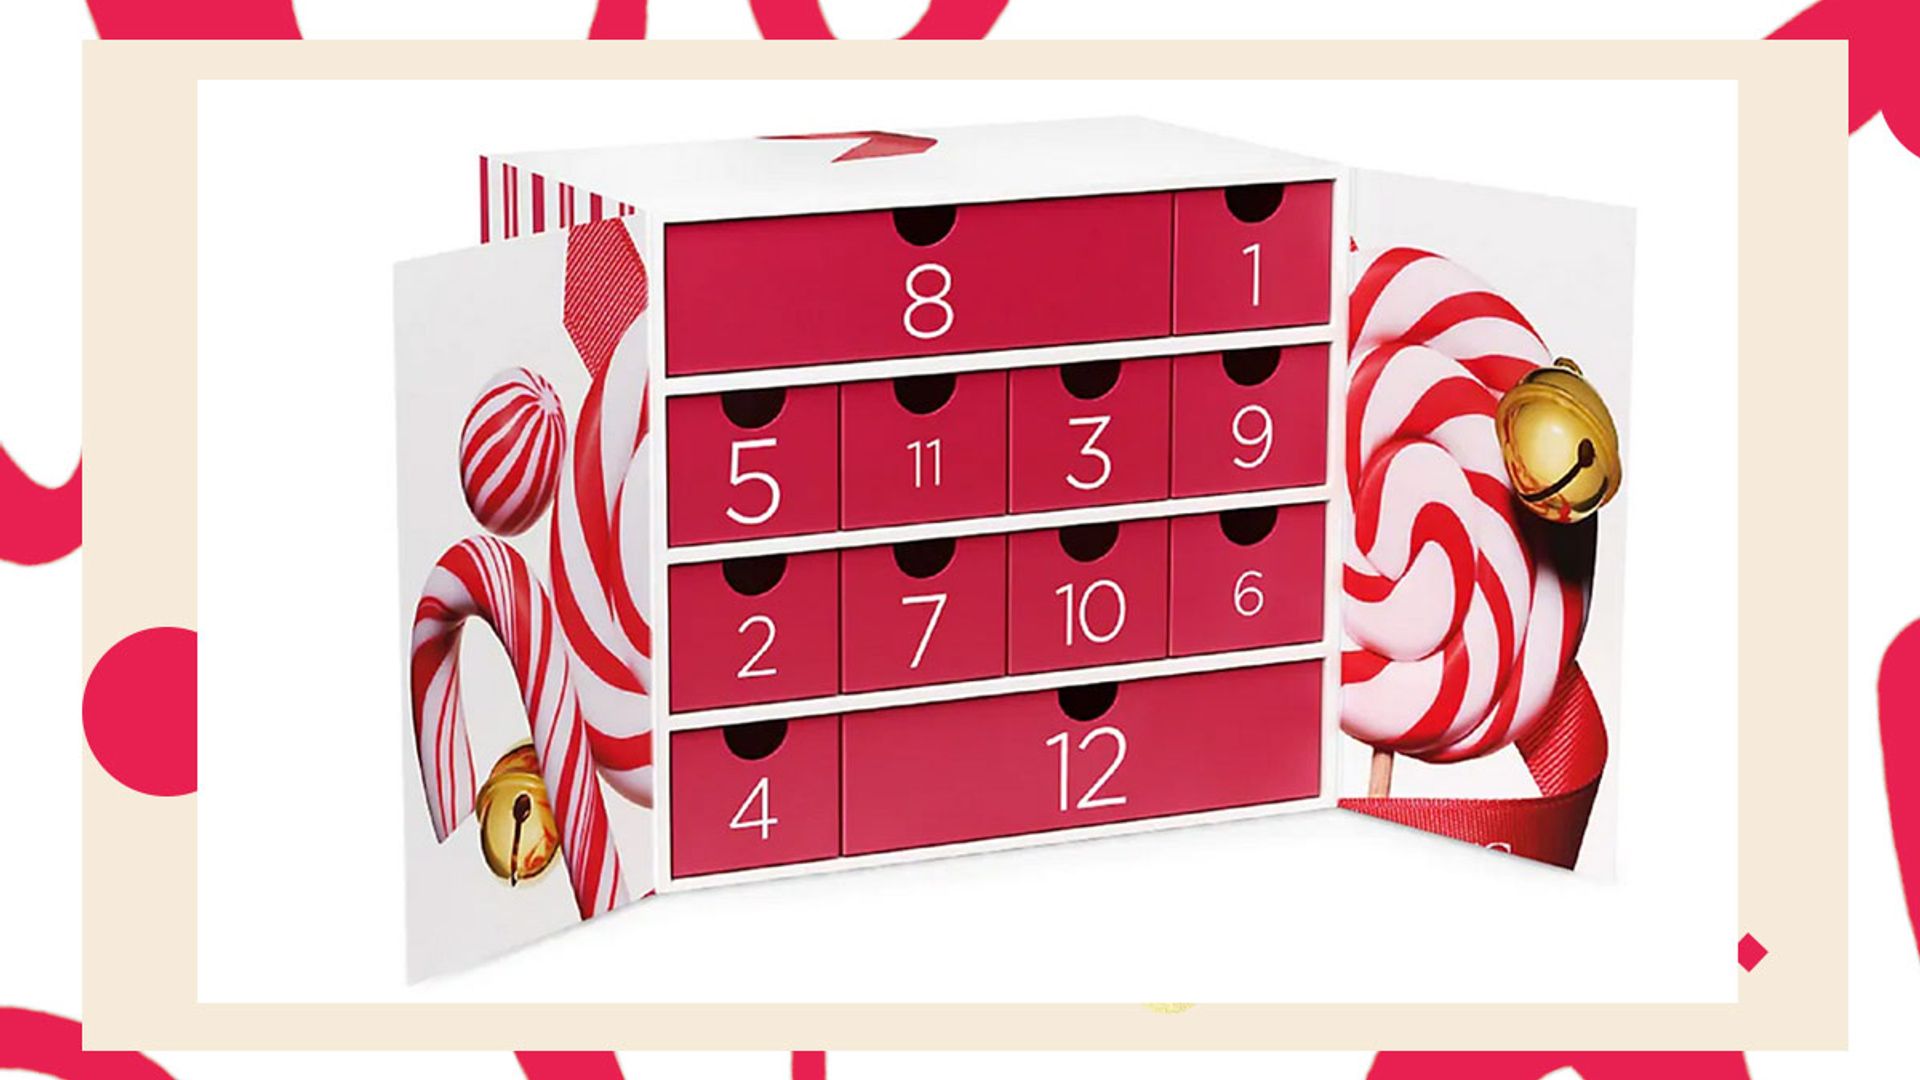 Saks is selling beauty advent calendars with a major Black Friday markdown